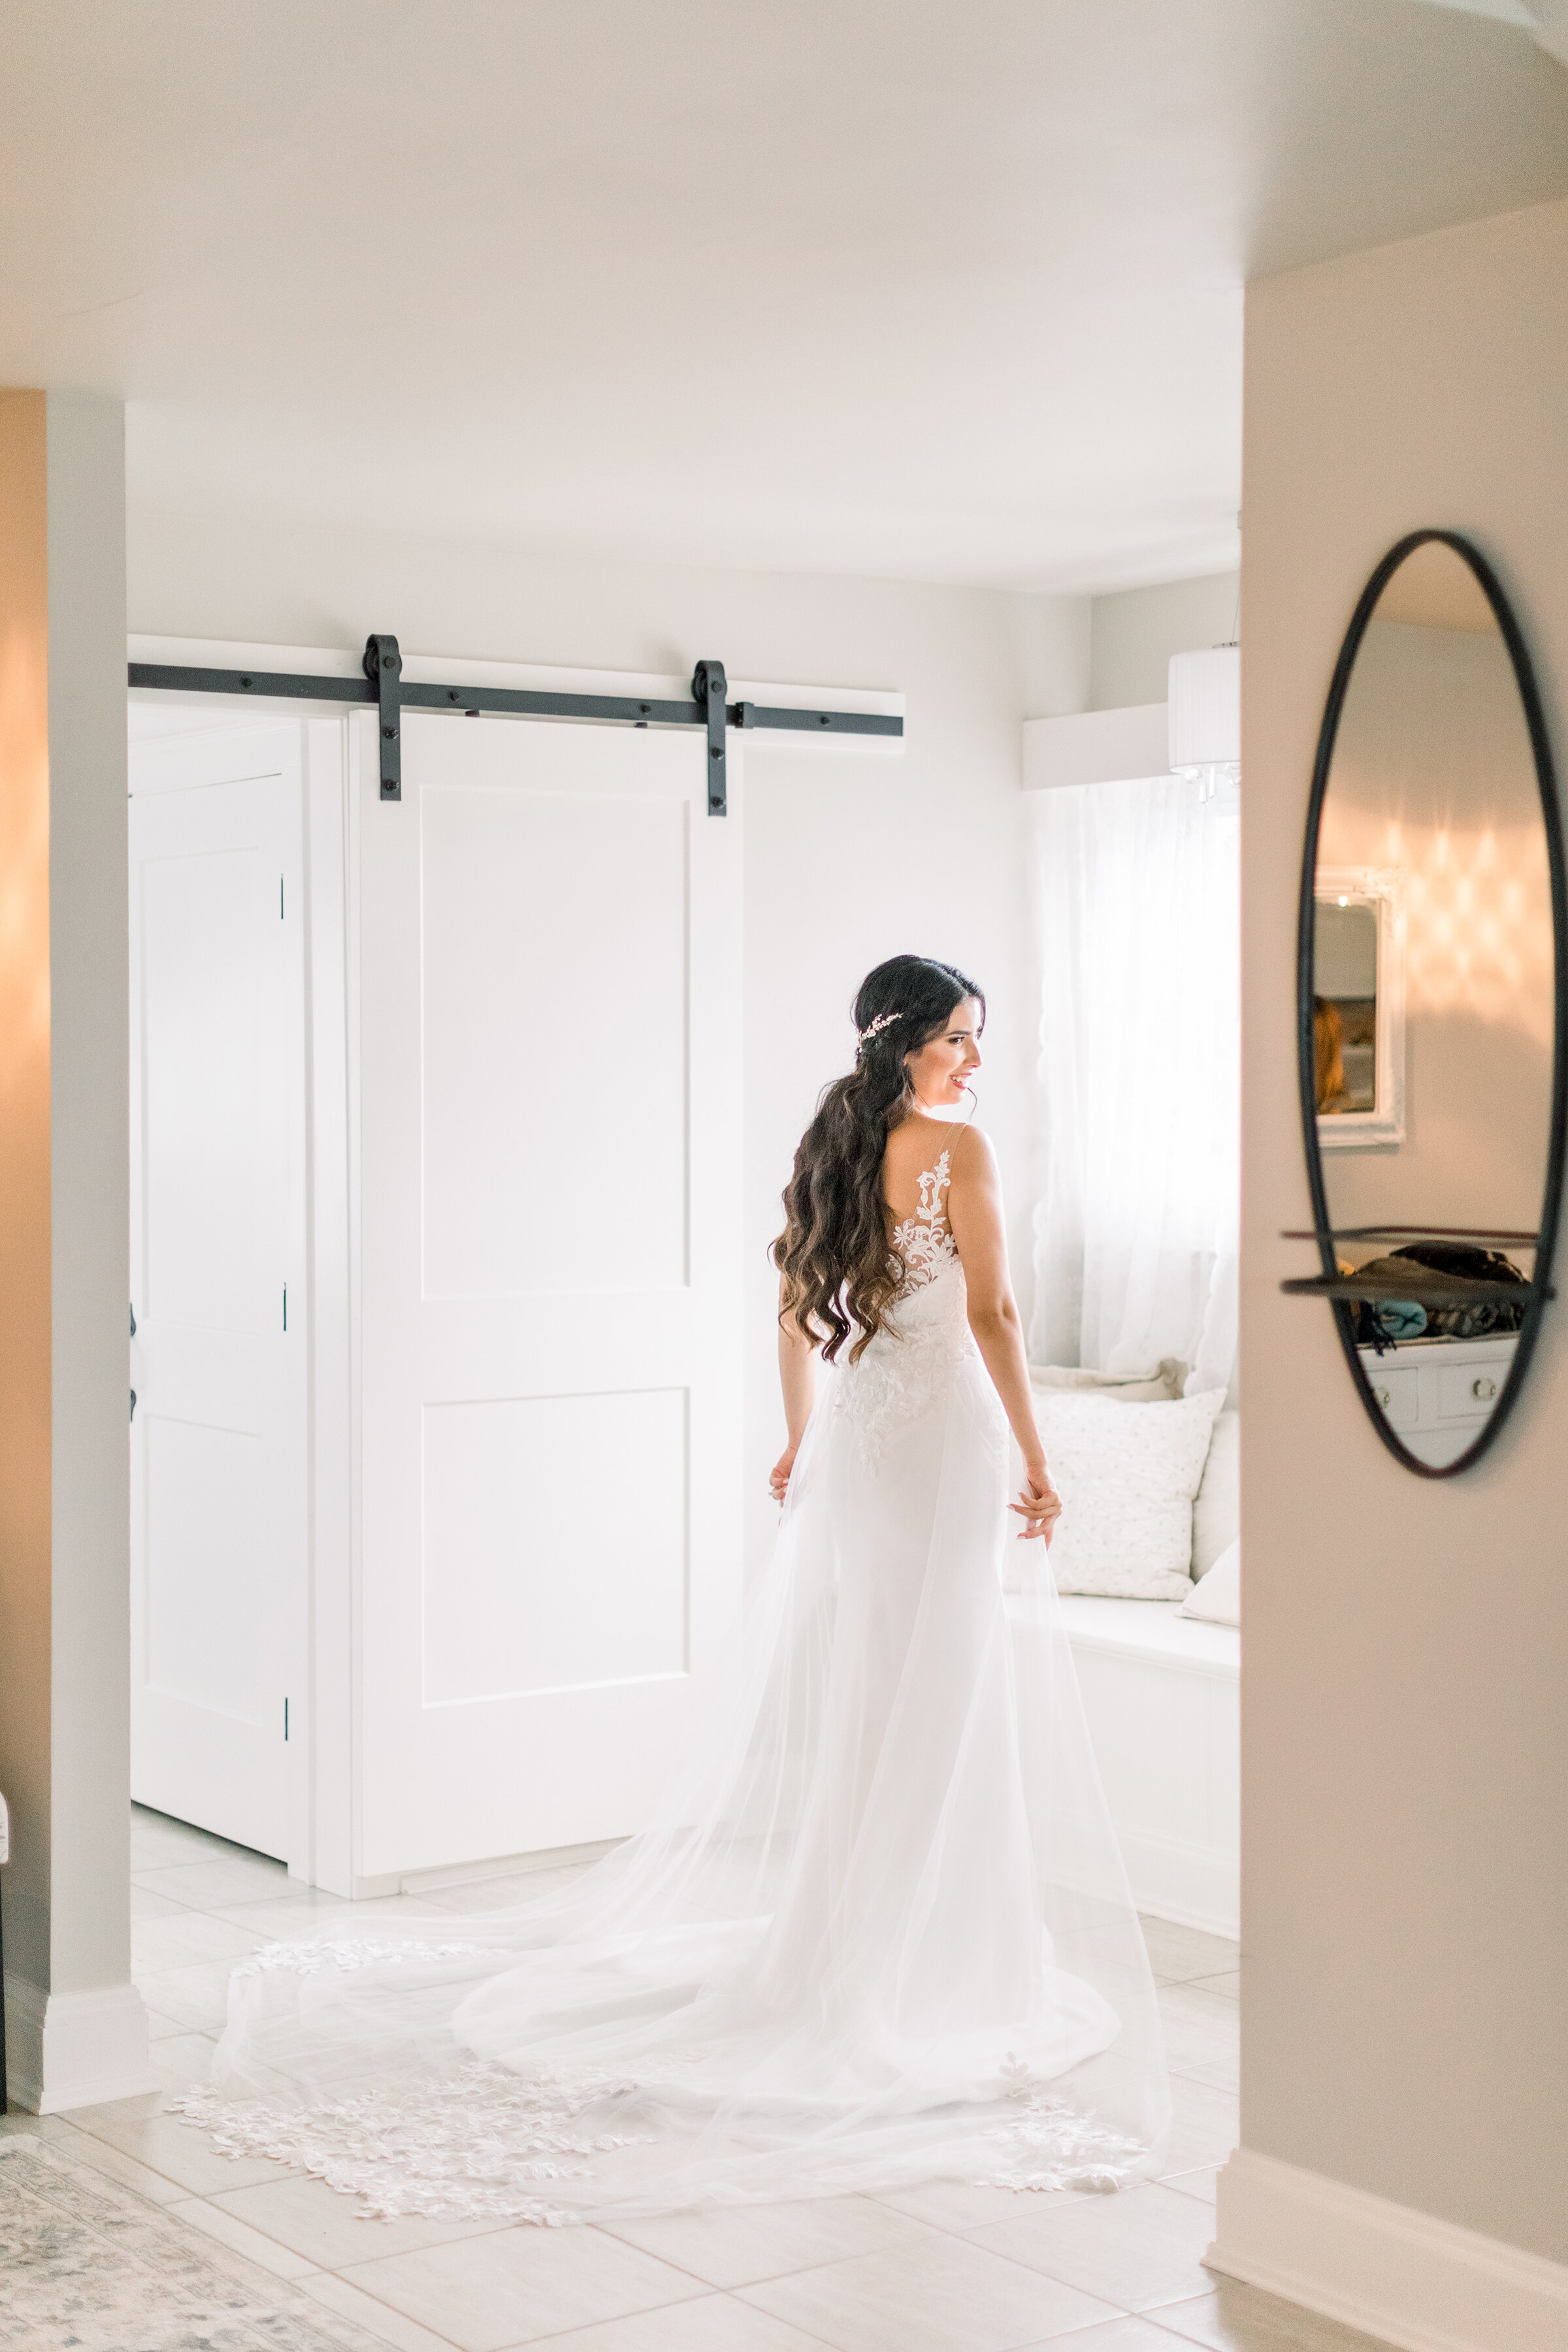  A stunning bride stands at the window in her wedding gown in a wedding styled photo shoot by Chelsea Mason Photography in Stonefields Estates, Carleton Place, Ottawa. Wedding inspiration bridal session inspiration bridal pose inspiration ideas and g